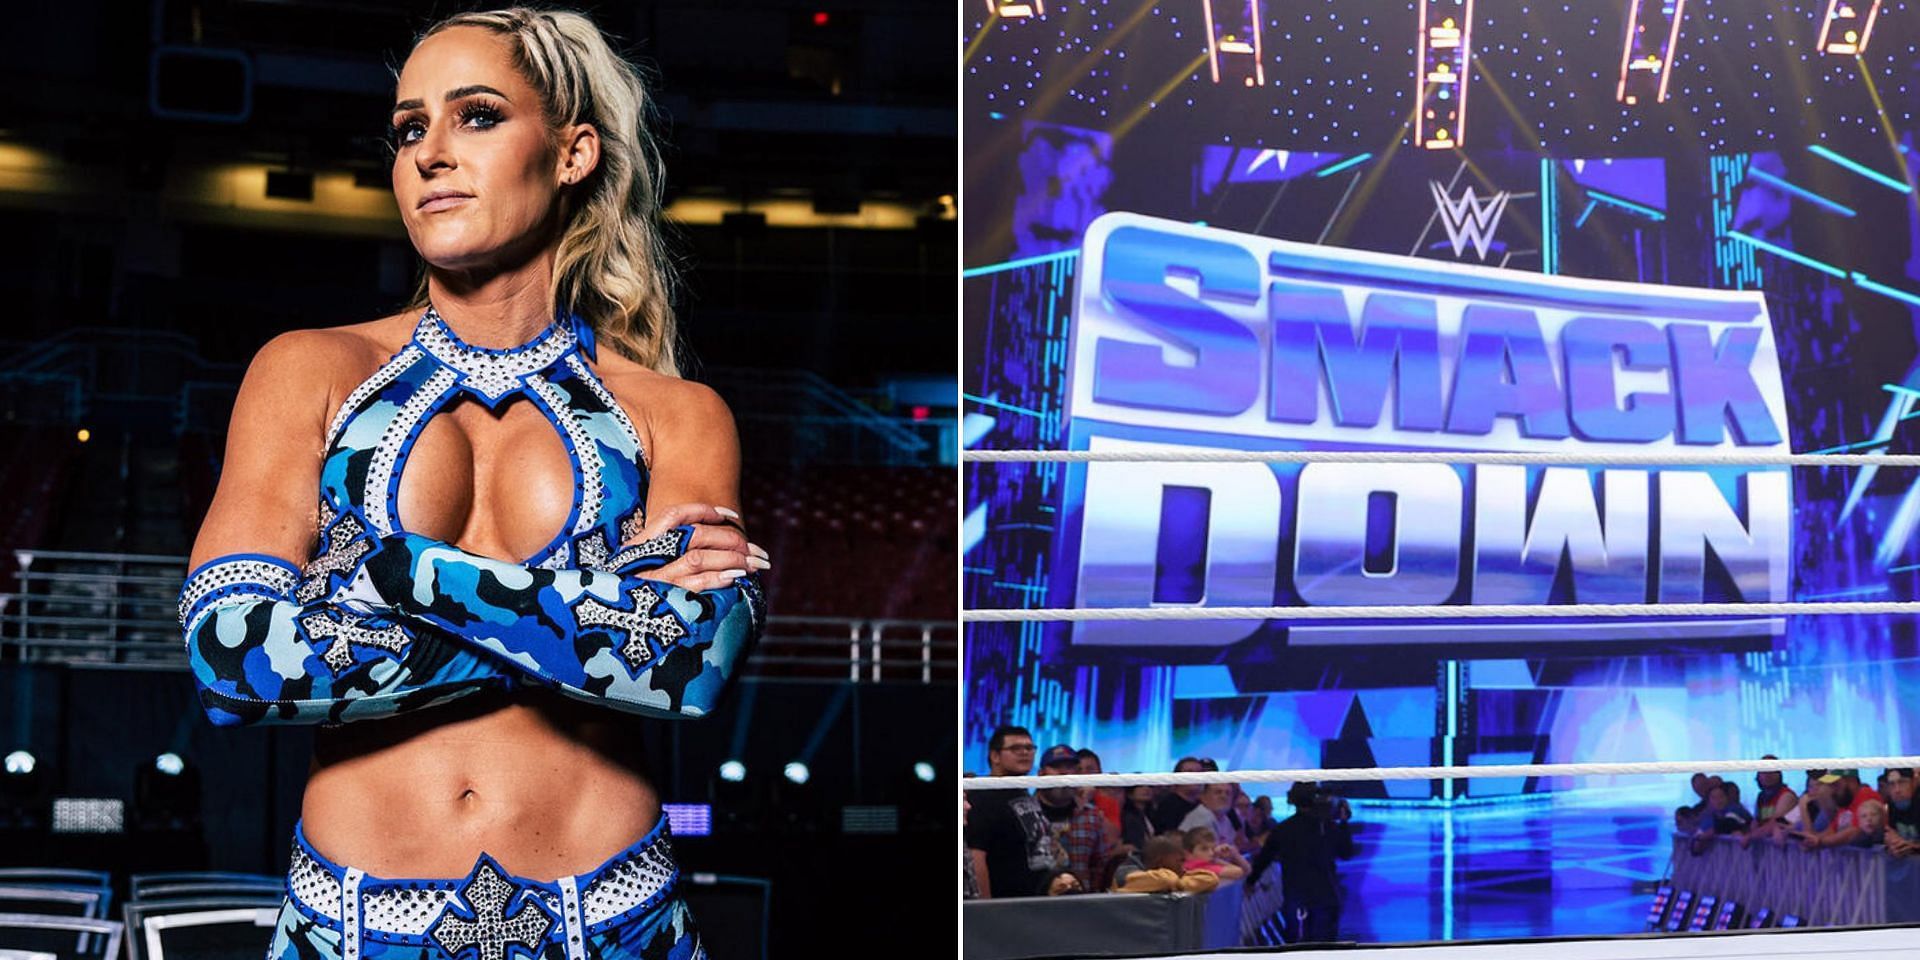 Two female wrestling legends were on SmackDown this week